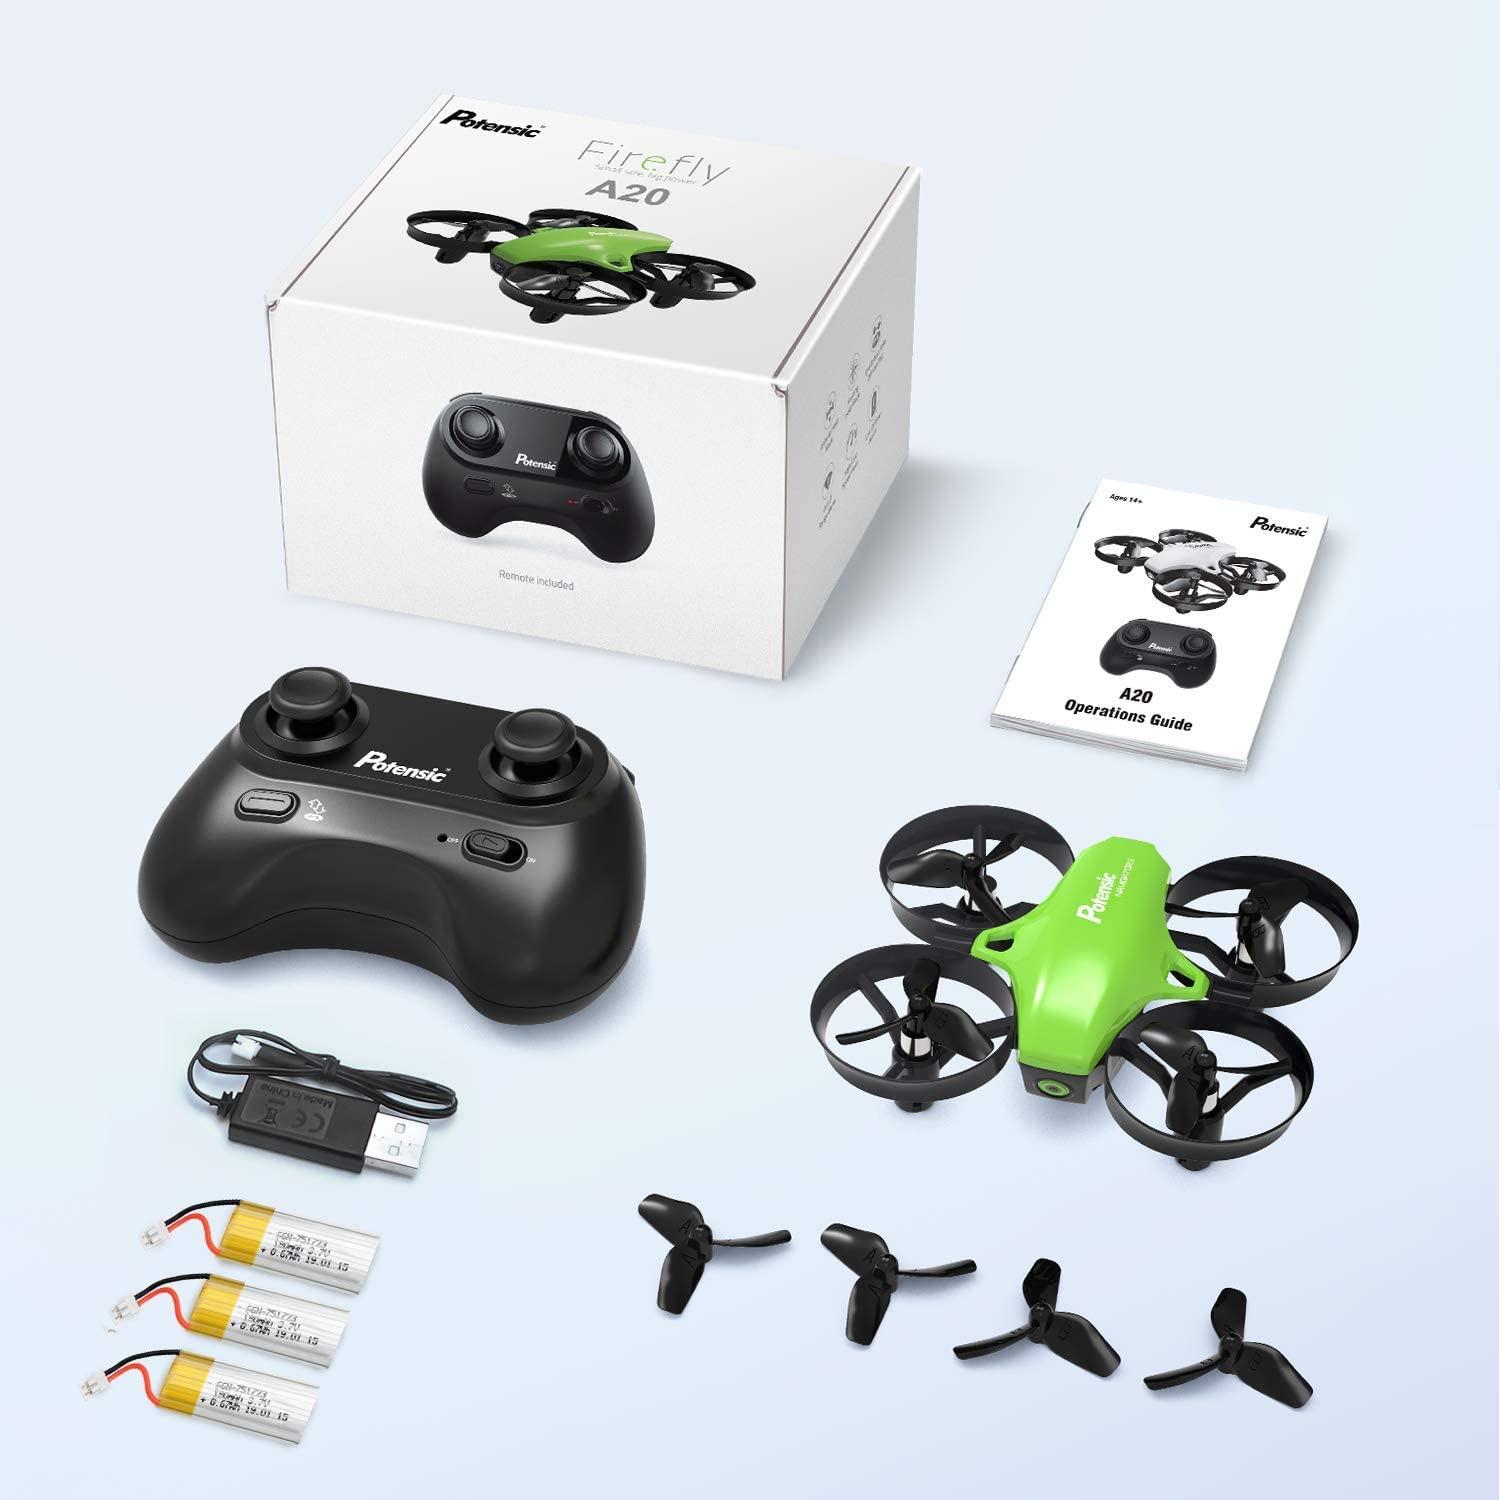 Potensic Upgraded A20 Mini Drone Easy to Fly Even to Kids and Beginners, RC  Helicopter Quadcopter with Auto Hovering, Headless Mode, 3 Batteries and  Remote Control, Gift Choice for Boys and Girls